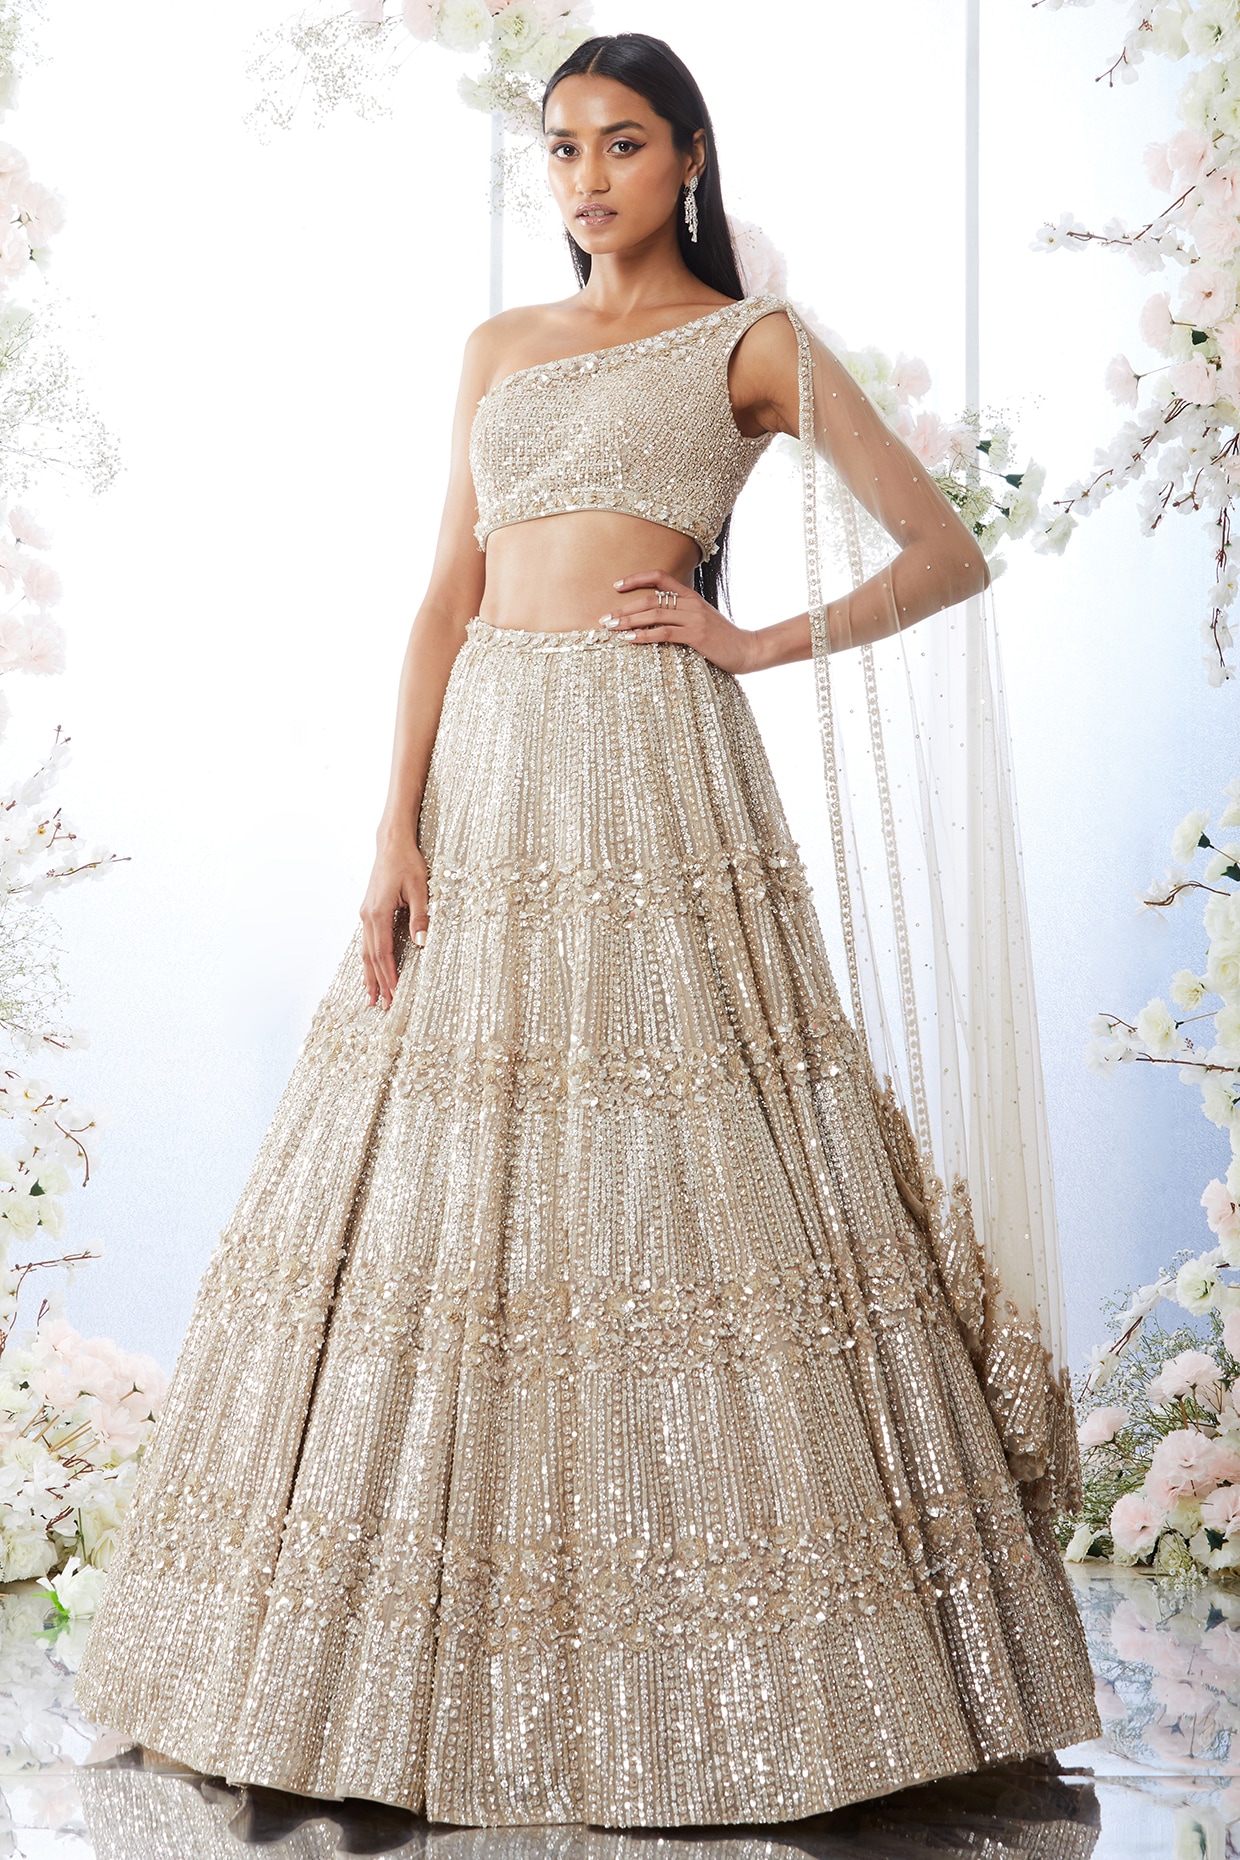 Latest 50 Crop Top and Lehenga Designs (2022) - Tips and Beauty | Lehenga  designs, Blouses for women, Indian outfits lehenga